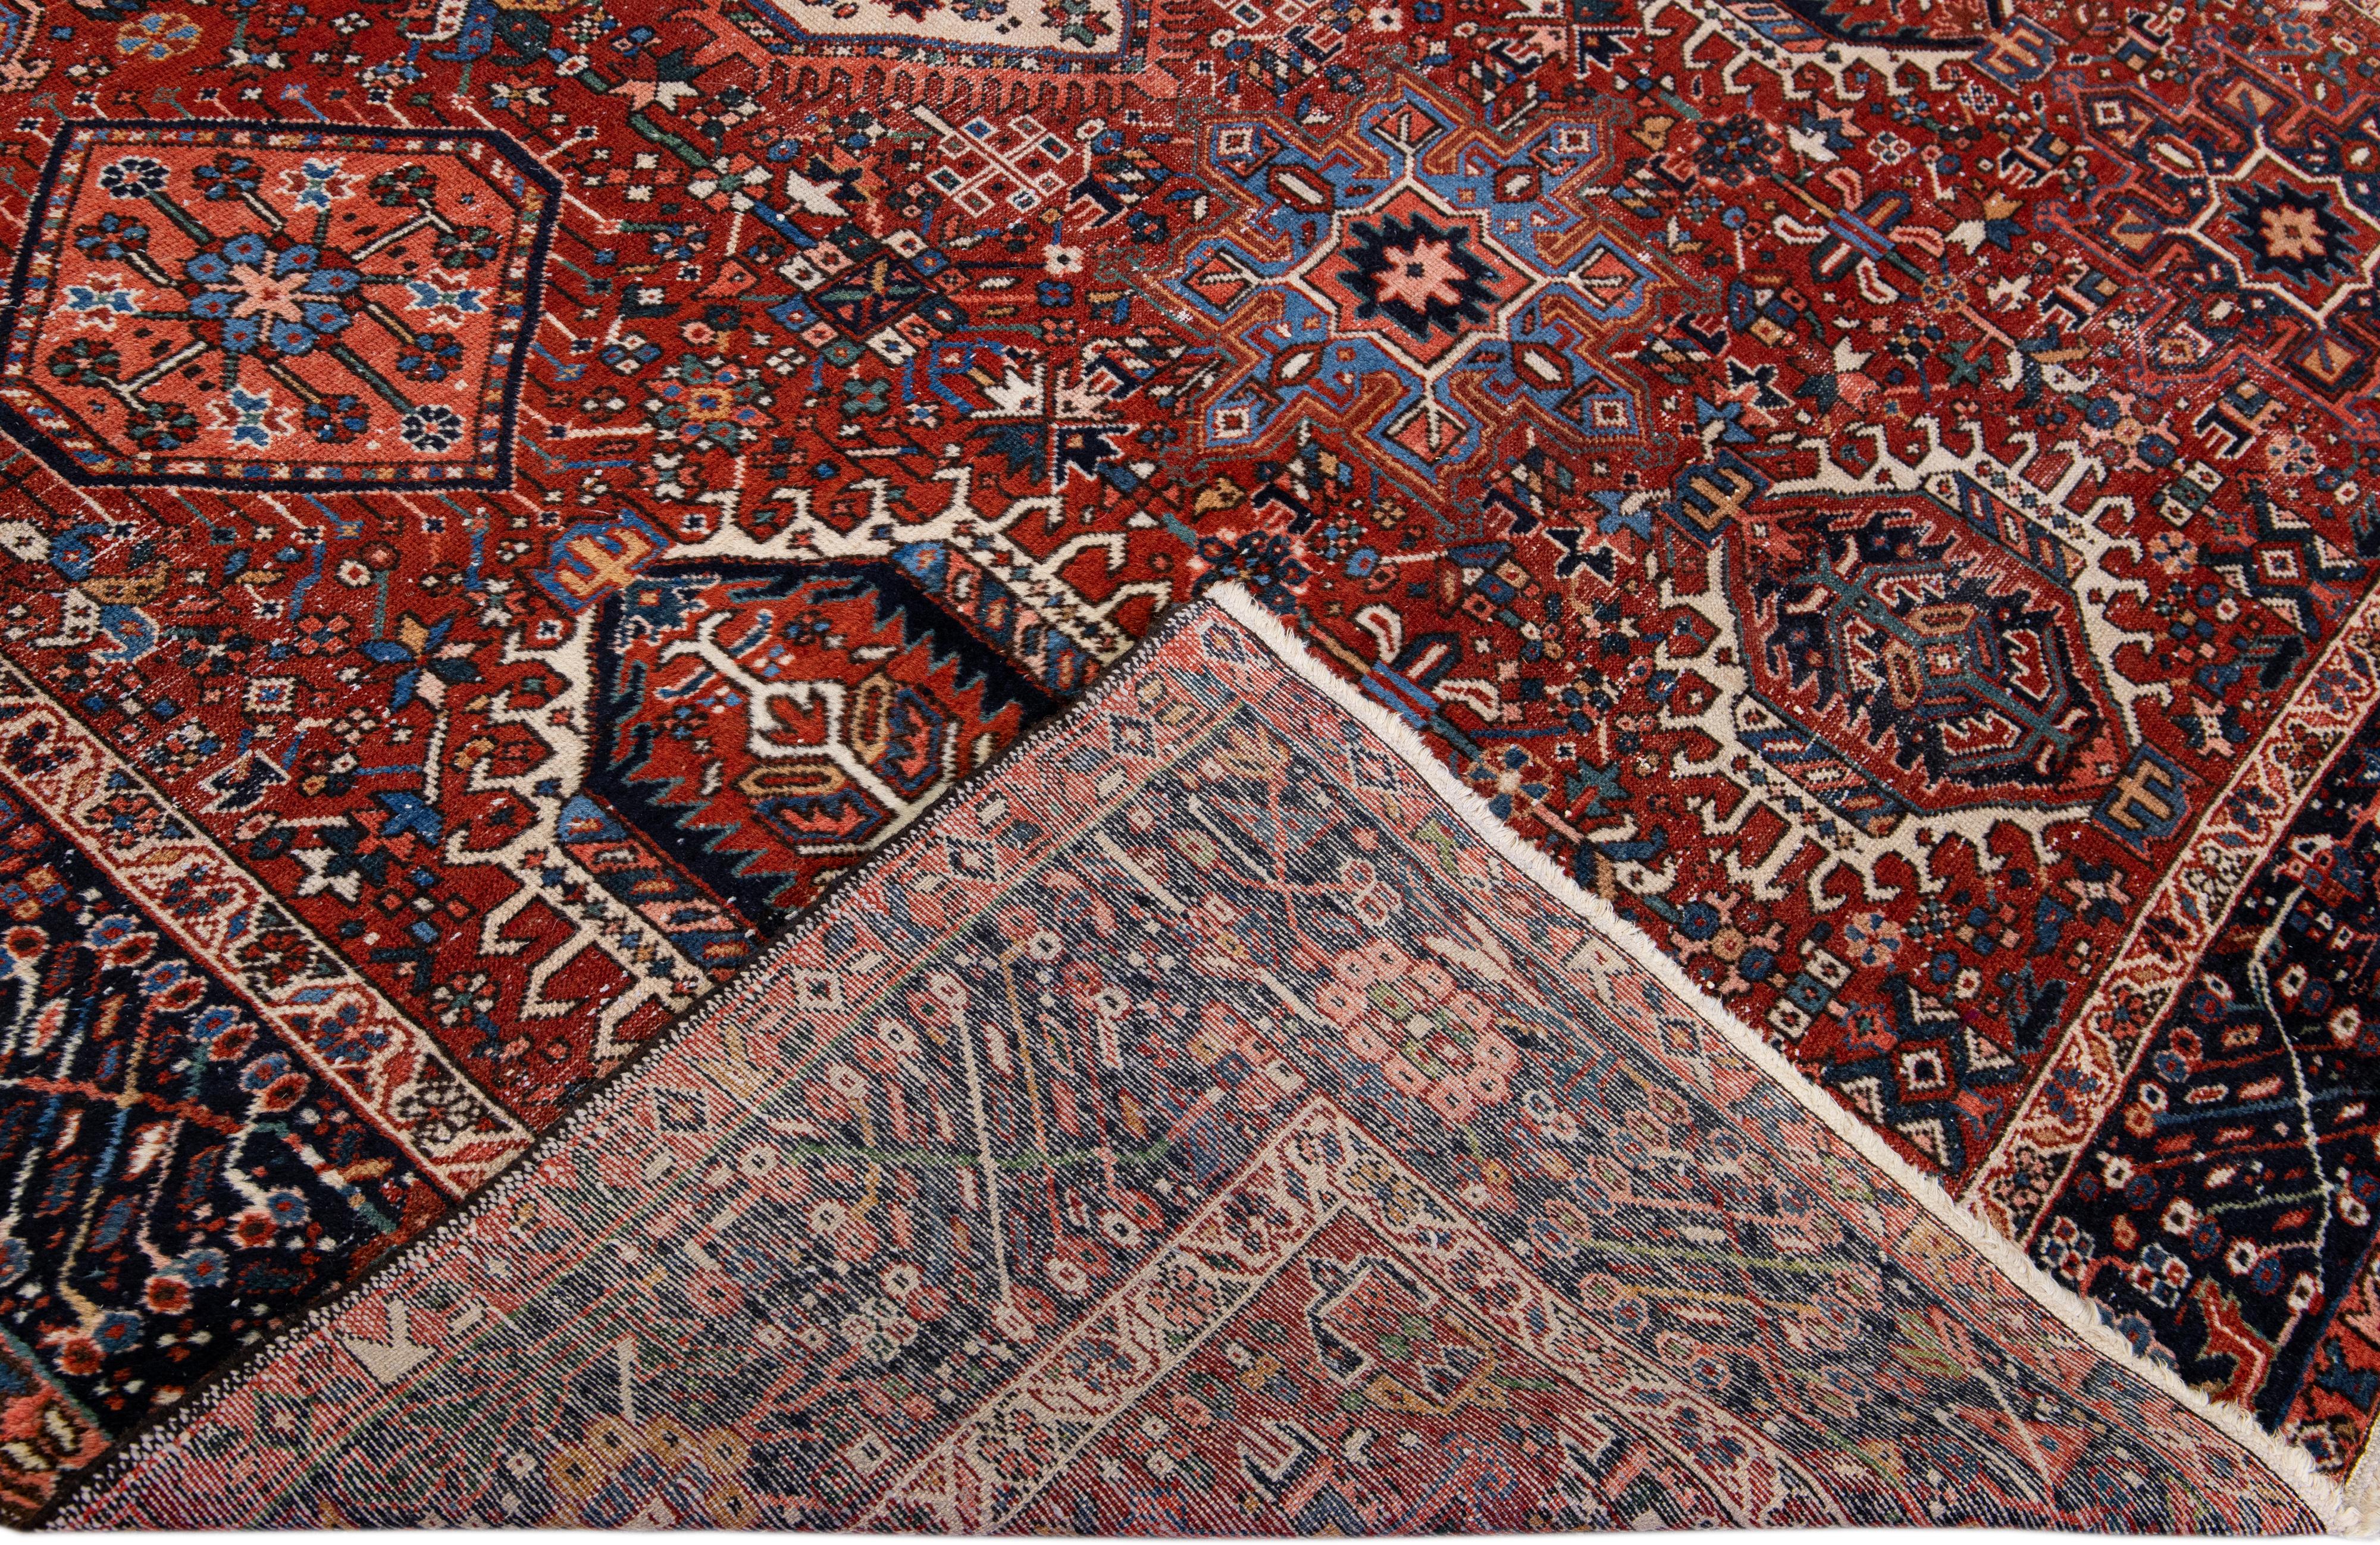 Beautiful antique Heriz Serapi hand-knotted wool rug with a red field. This Heriz rug has a navy-blue designed frame and multi-color accents in a gorgeous all-over geometric design.

This rug measures: 7'7